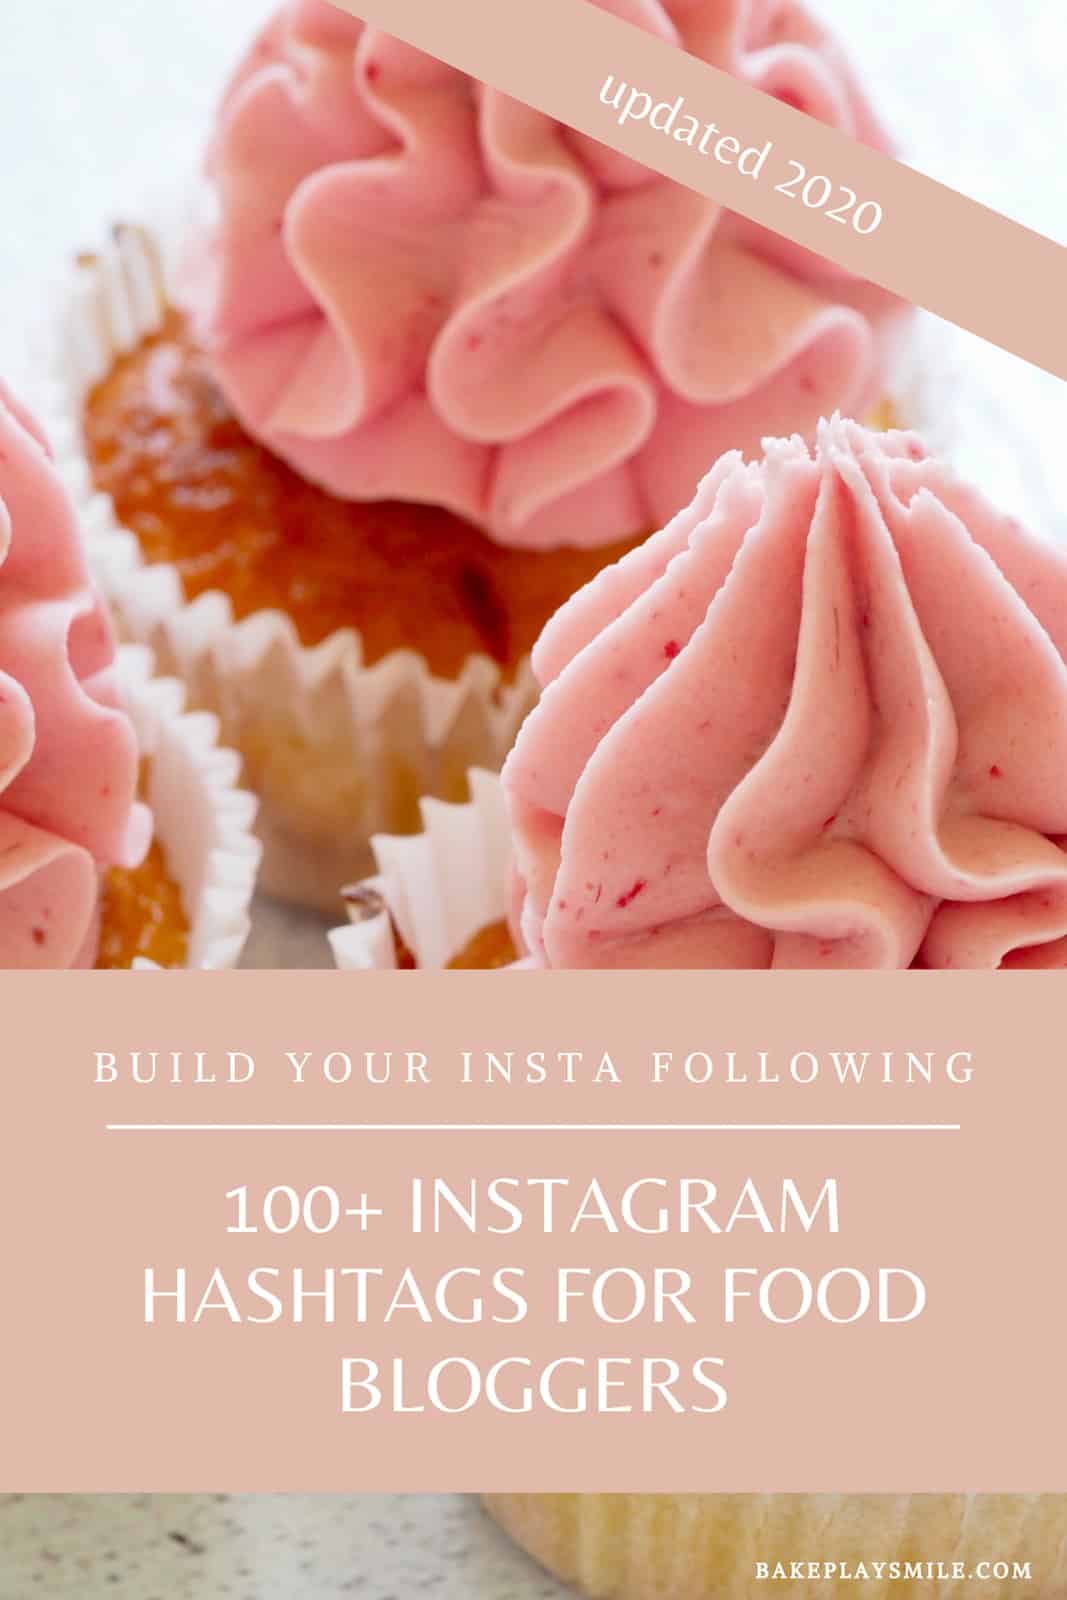 An image of cupcakes pink cupcakes with the title Instagram Hashtags For Food Bloggers over the top.